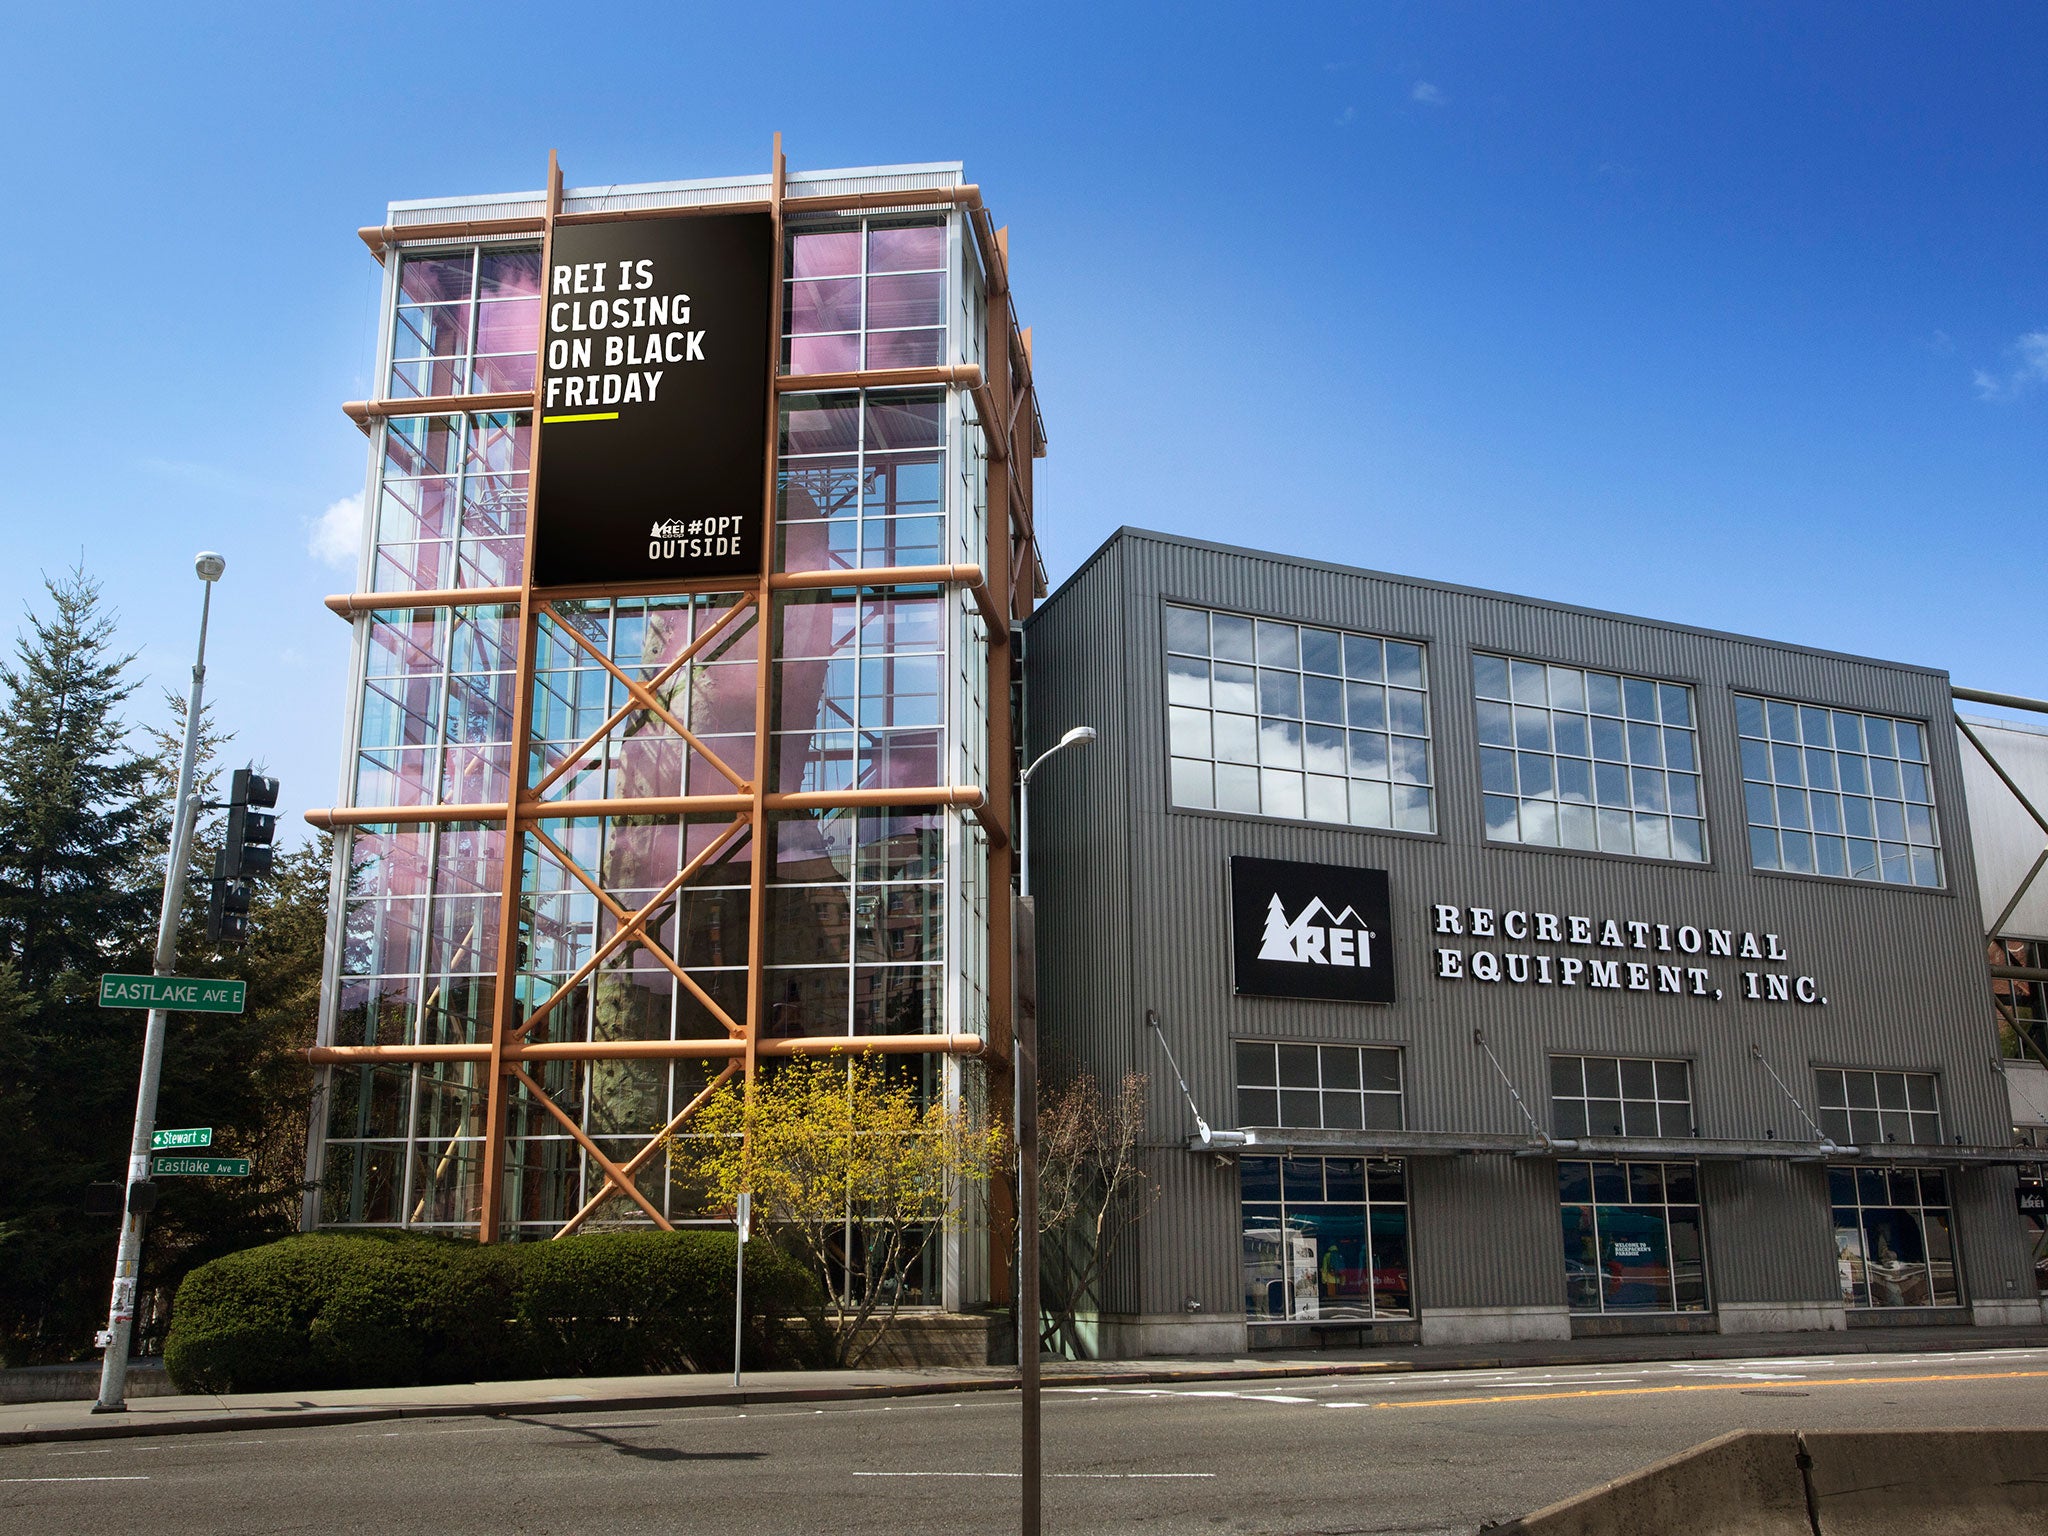 This Black Friday, REI’s 11,000 employees won’t have to work at all – in fact they will get paid for going outside instead